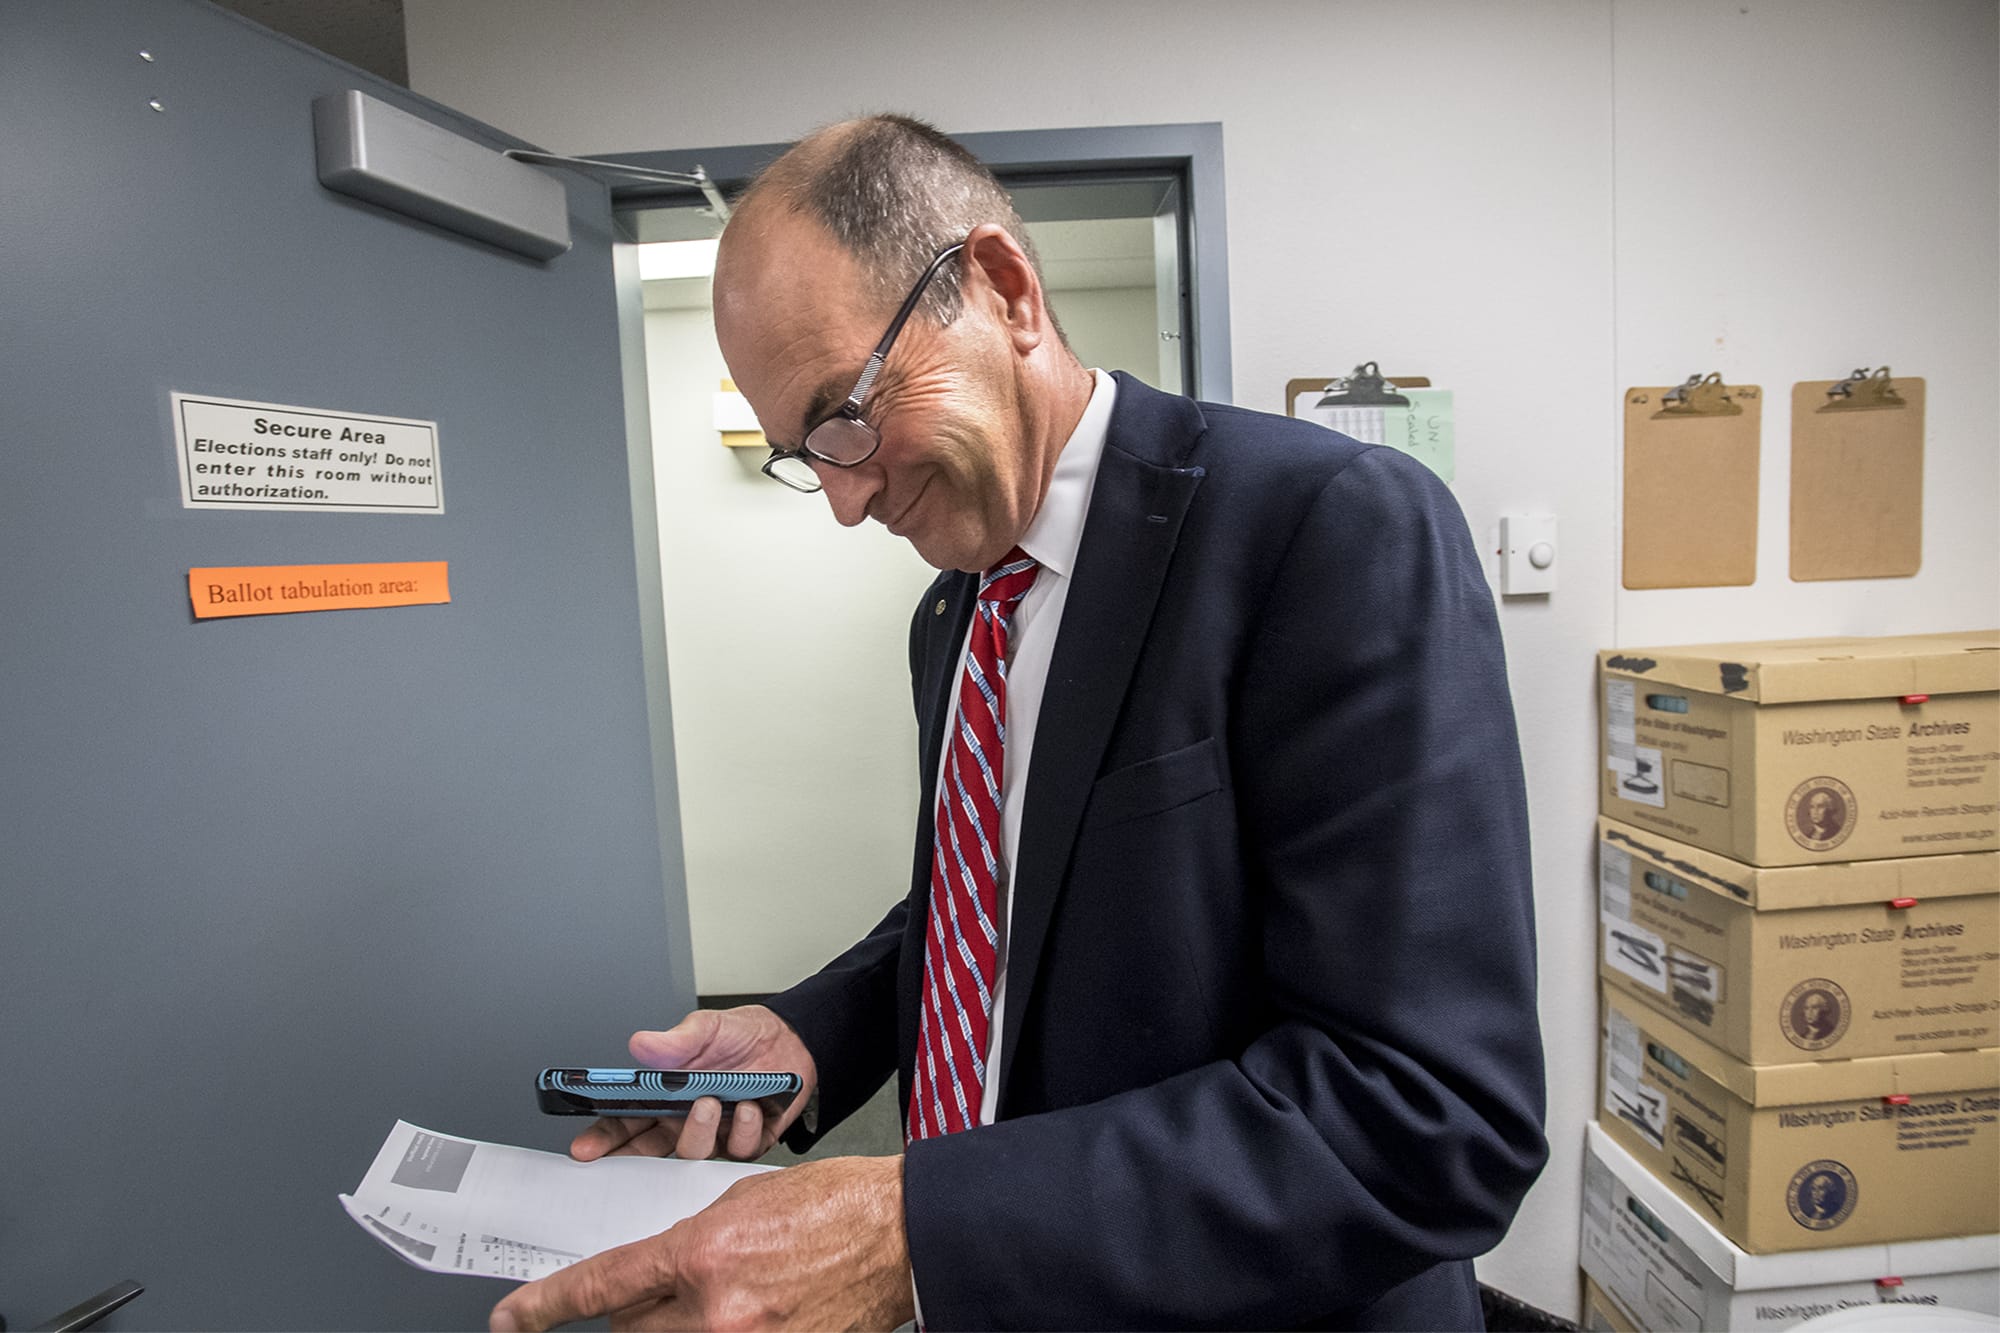 Clark County Auditor Greg Kimsey views the first primary election result printout in the Ballot Tabulation Room of the Clark County Election Office on Tuesday night, Aug. 6, 2019.